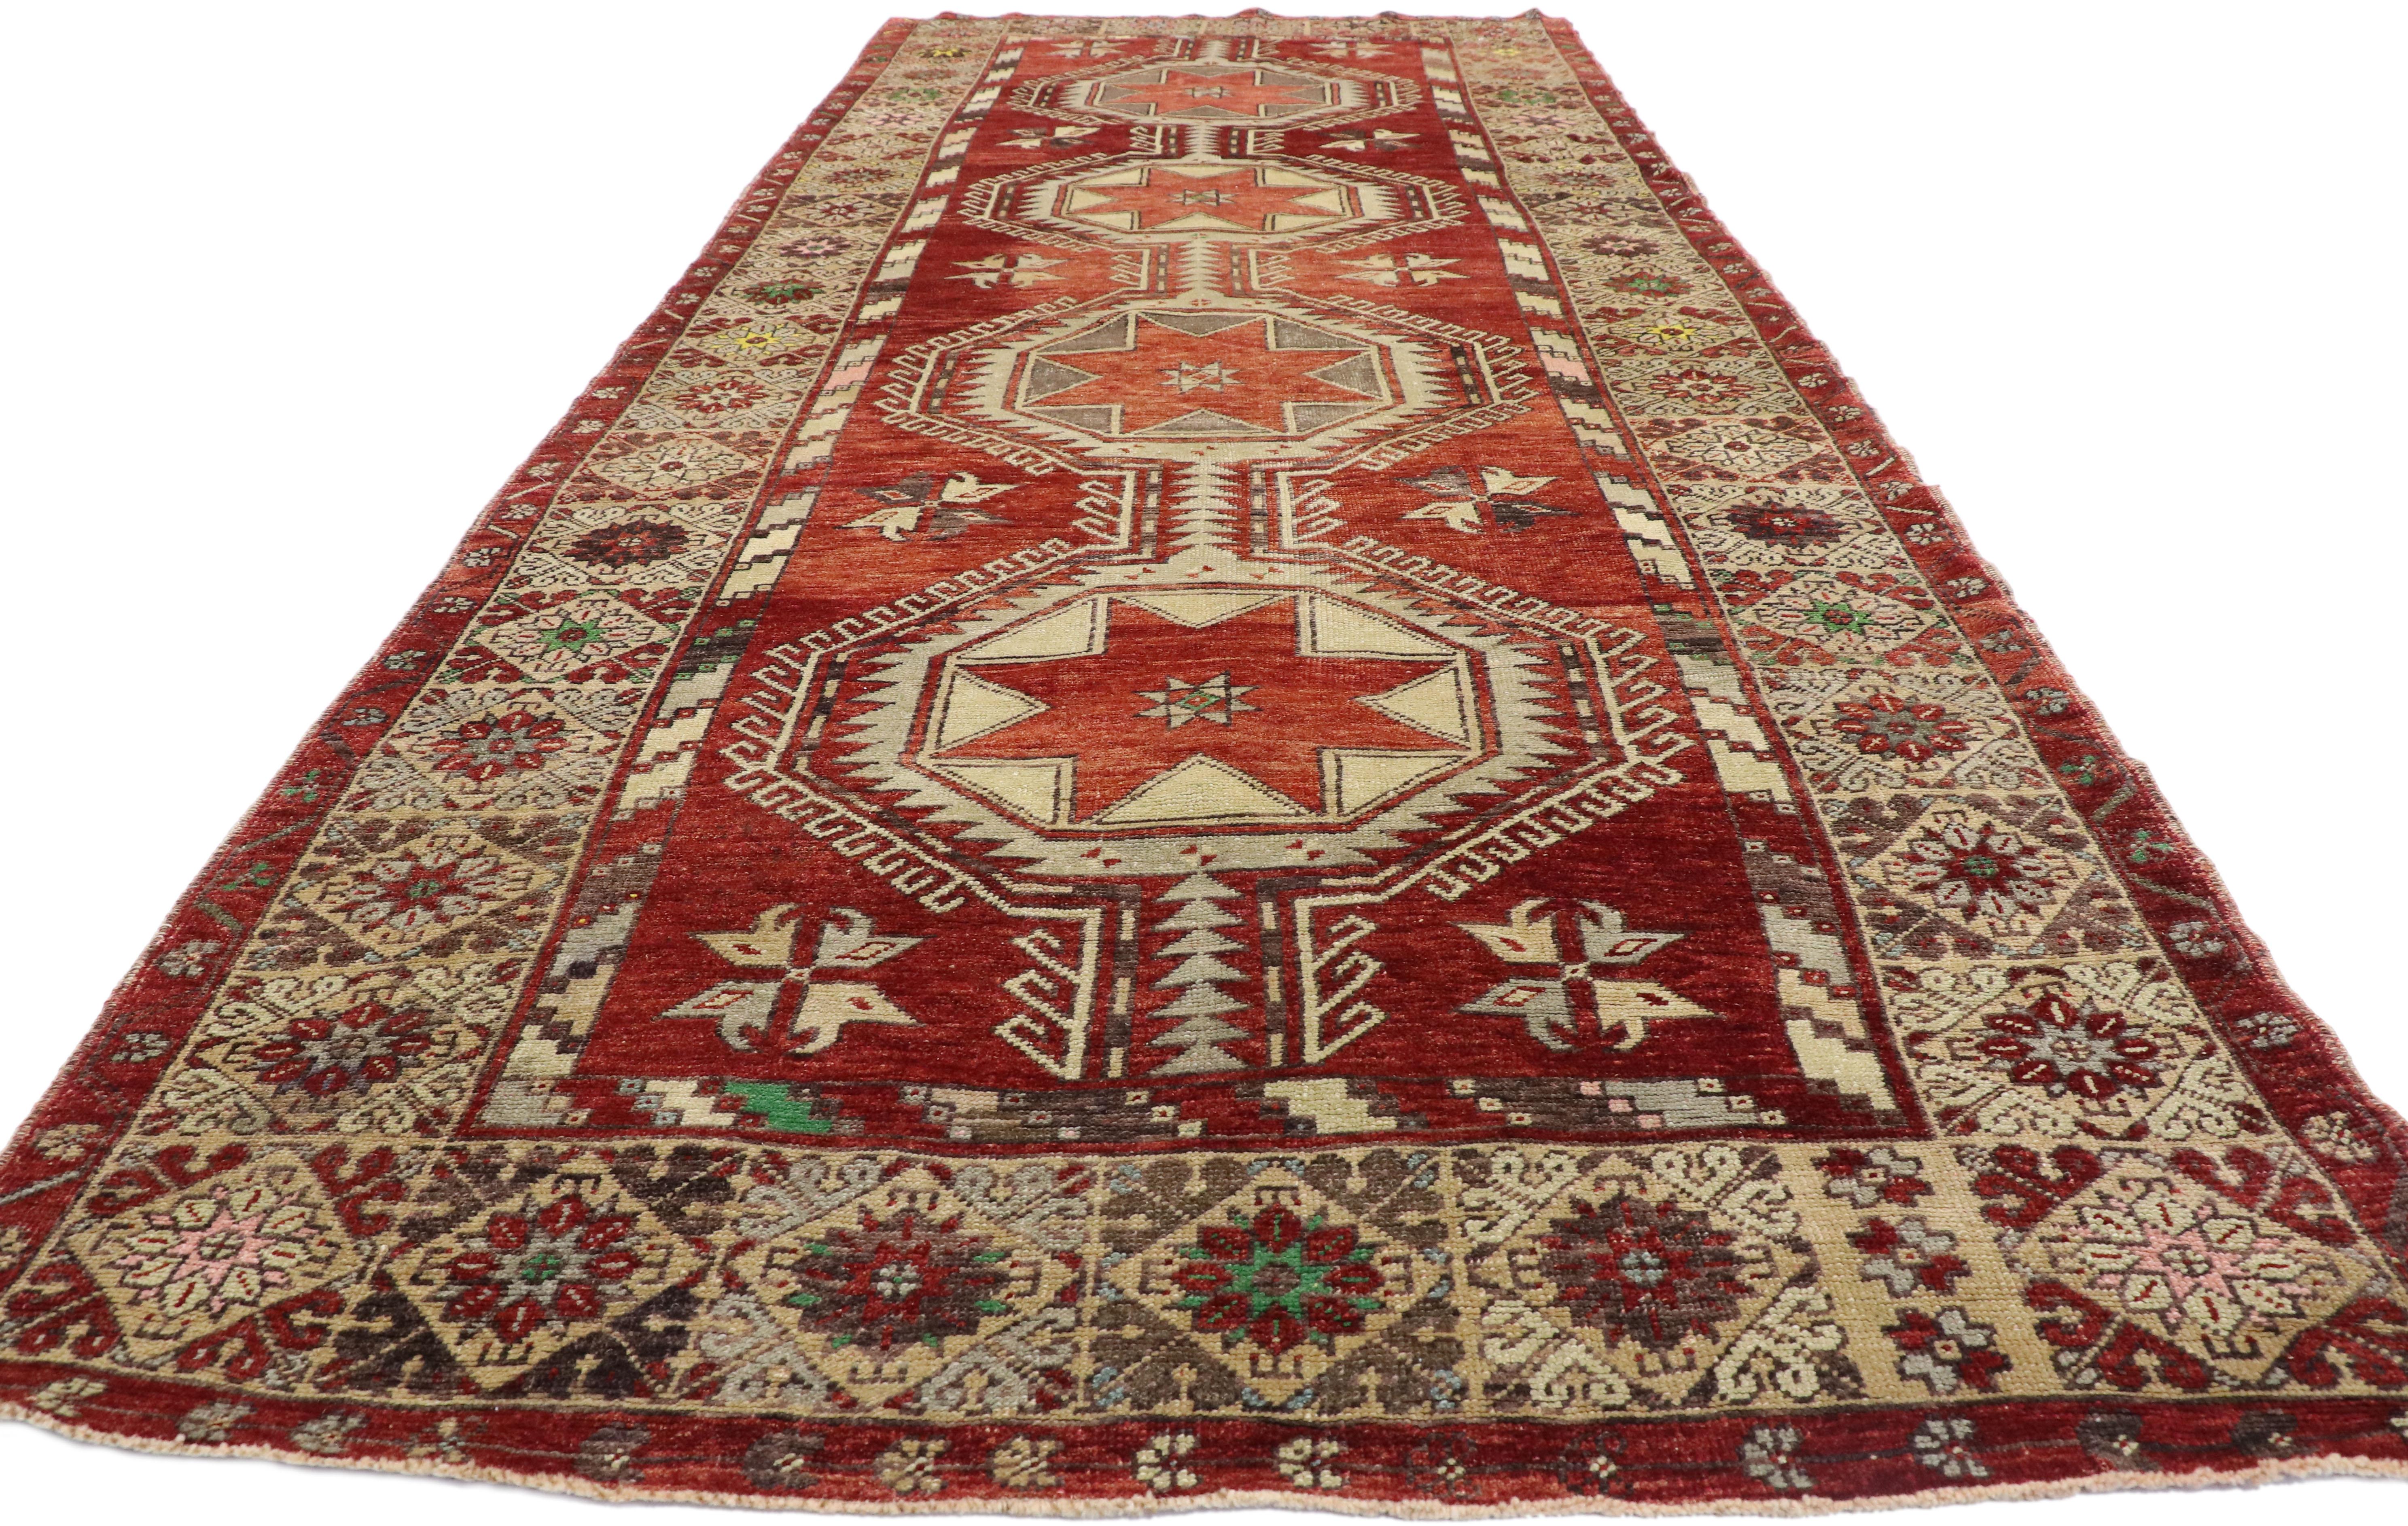 Vintage Turkish Oushak Gallery Rug with Mid-Century Modern Style, Hallway Runner In Good Condition For Sale In Dallas, TX